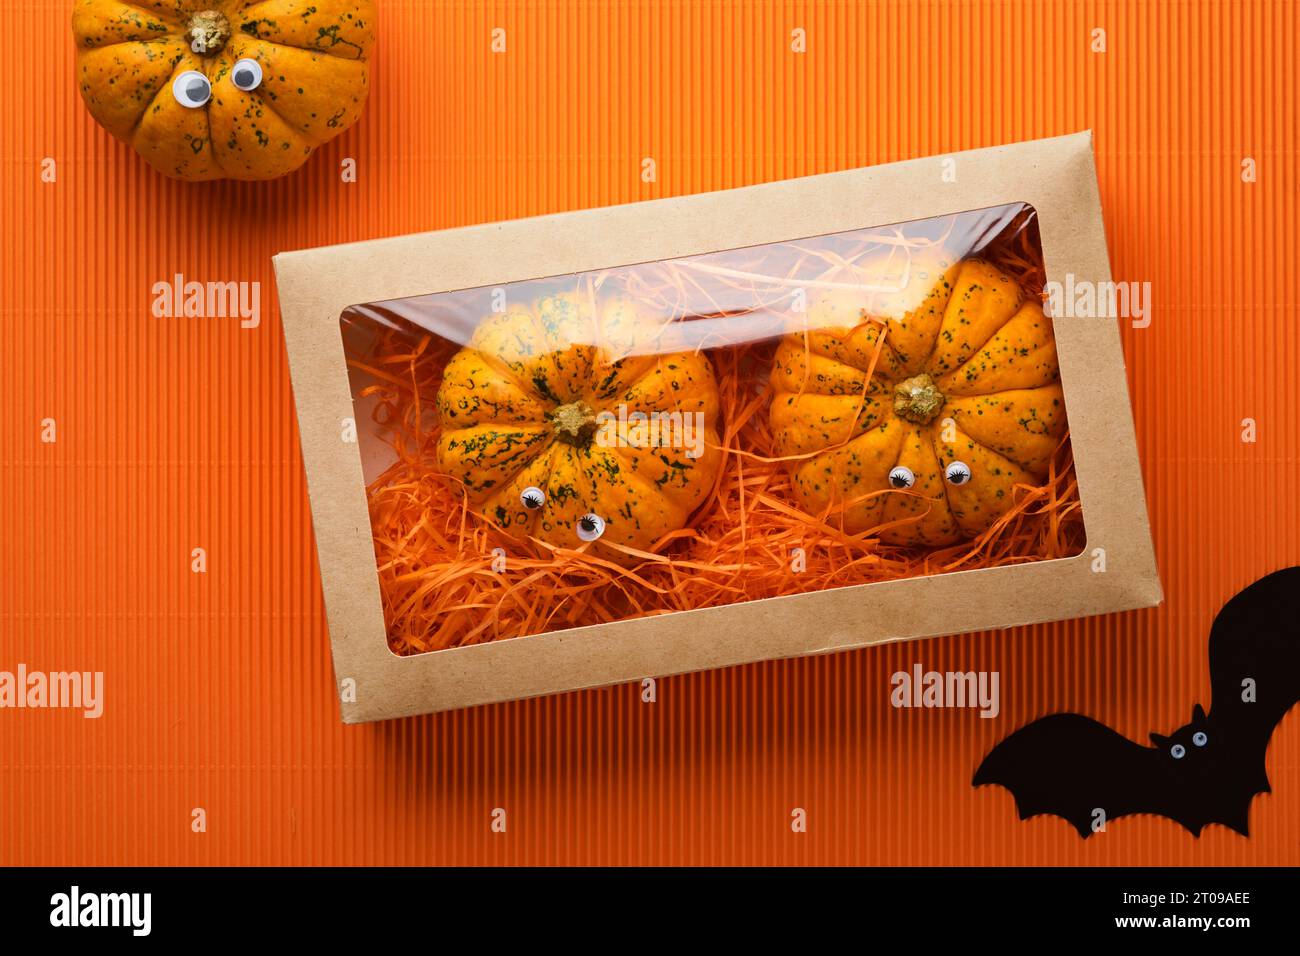 Halloween holiday background. Orange pumpkin in box, bat with funny eyes, spider, spider web, old leaves and branches from scary forest on orange back Stock Photo